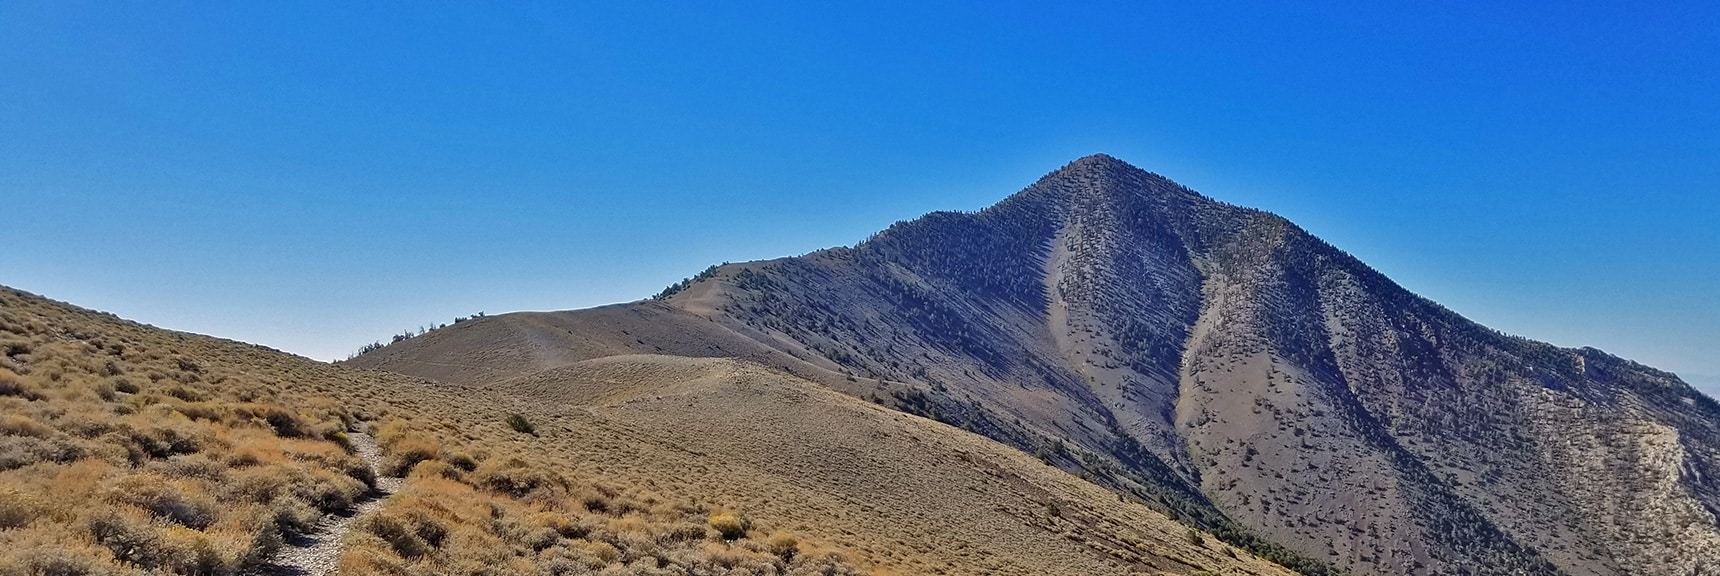 Rounding Bennett Peak to Full View of Telescope Peak and Final Ascent | Telescope Peak Summit from Wildrose Charcoal Kilns Parking Area, Panamint Mountains, Death Valley National Park, California